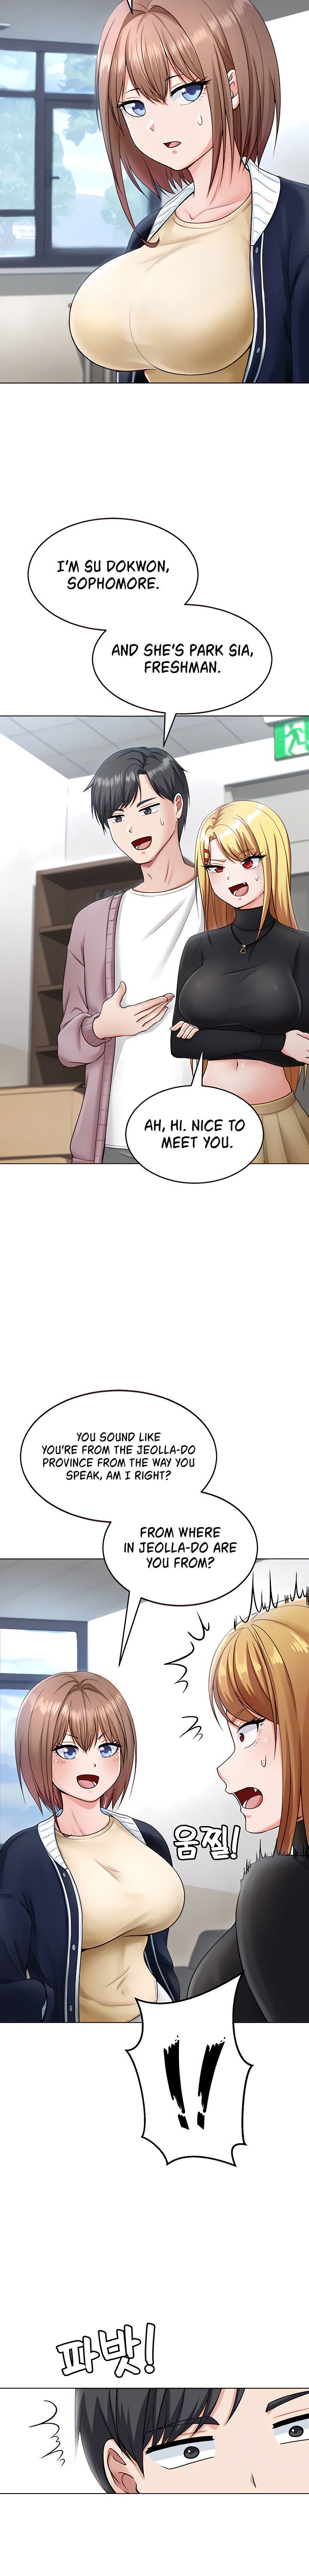 Seoul Kids These Days - Chapter 5 Page 20